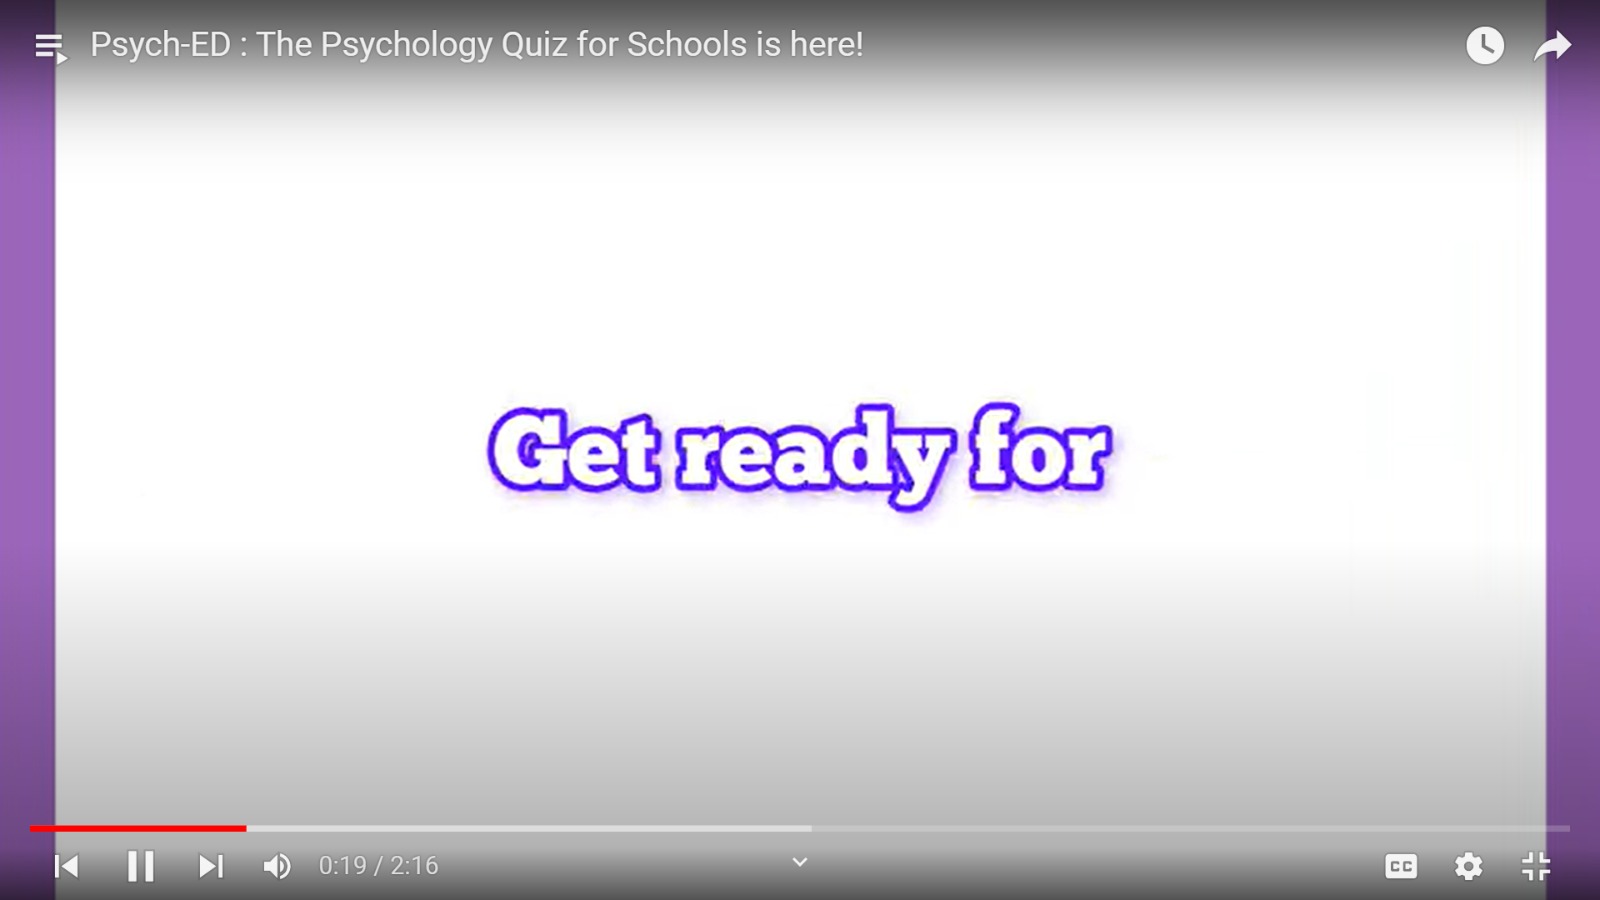 Psych-ED : The Psychology Quiz for Schools is here!